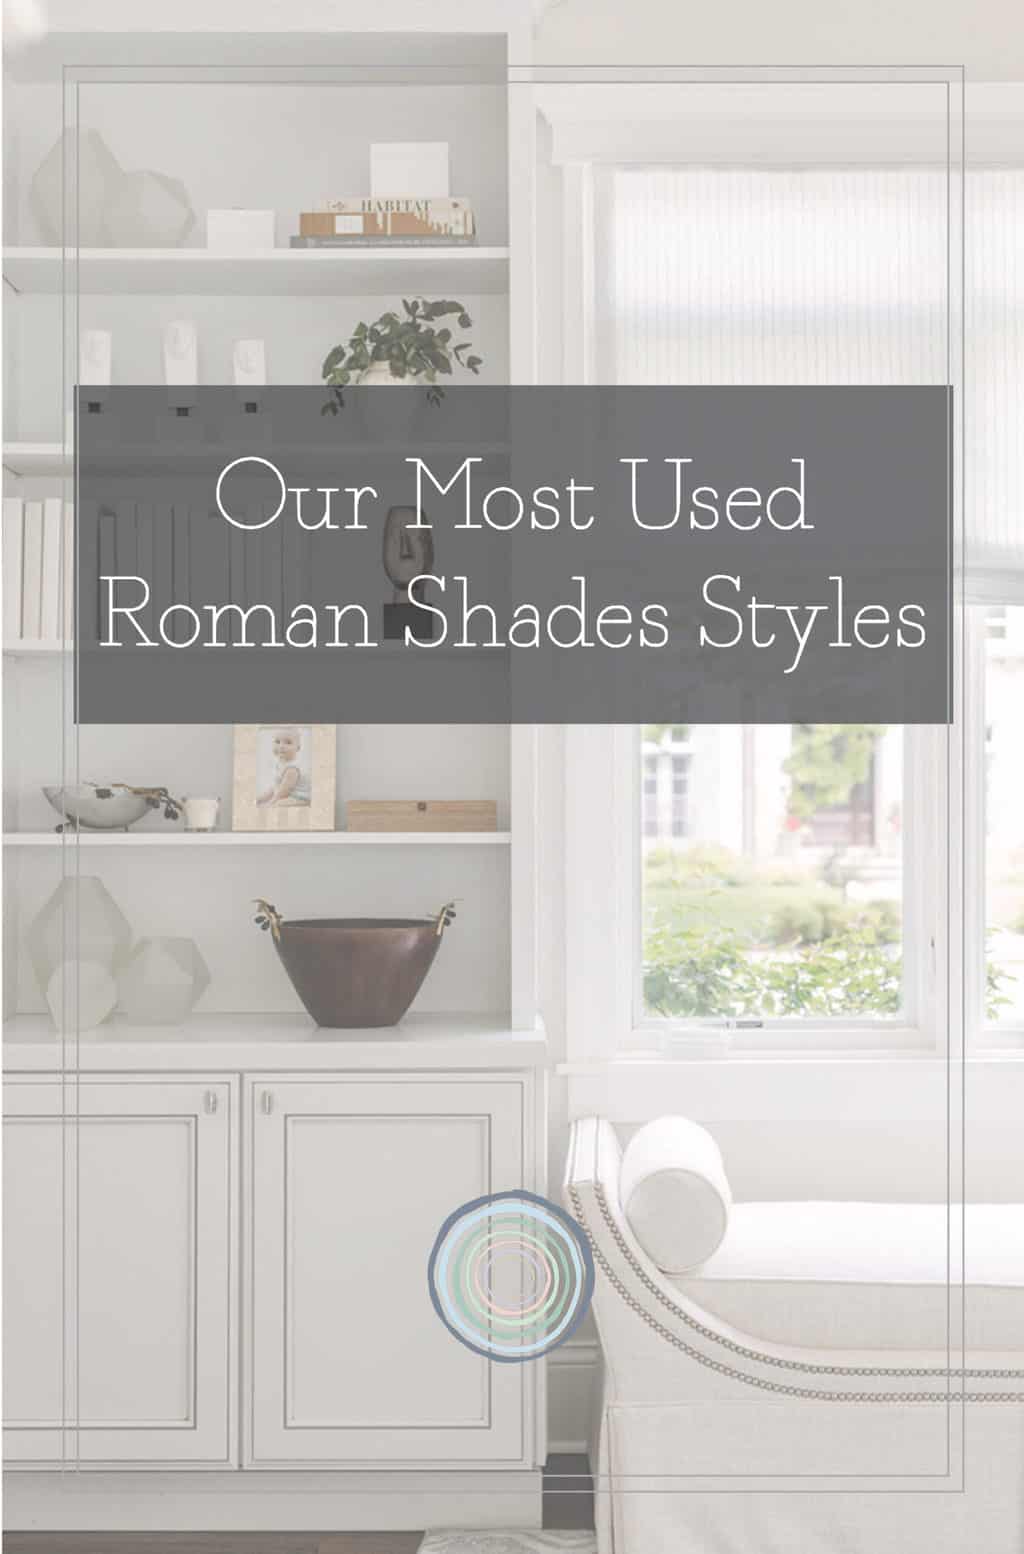 Our Most Used Roman Shades Styles